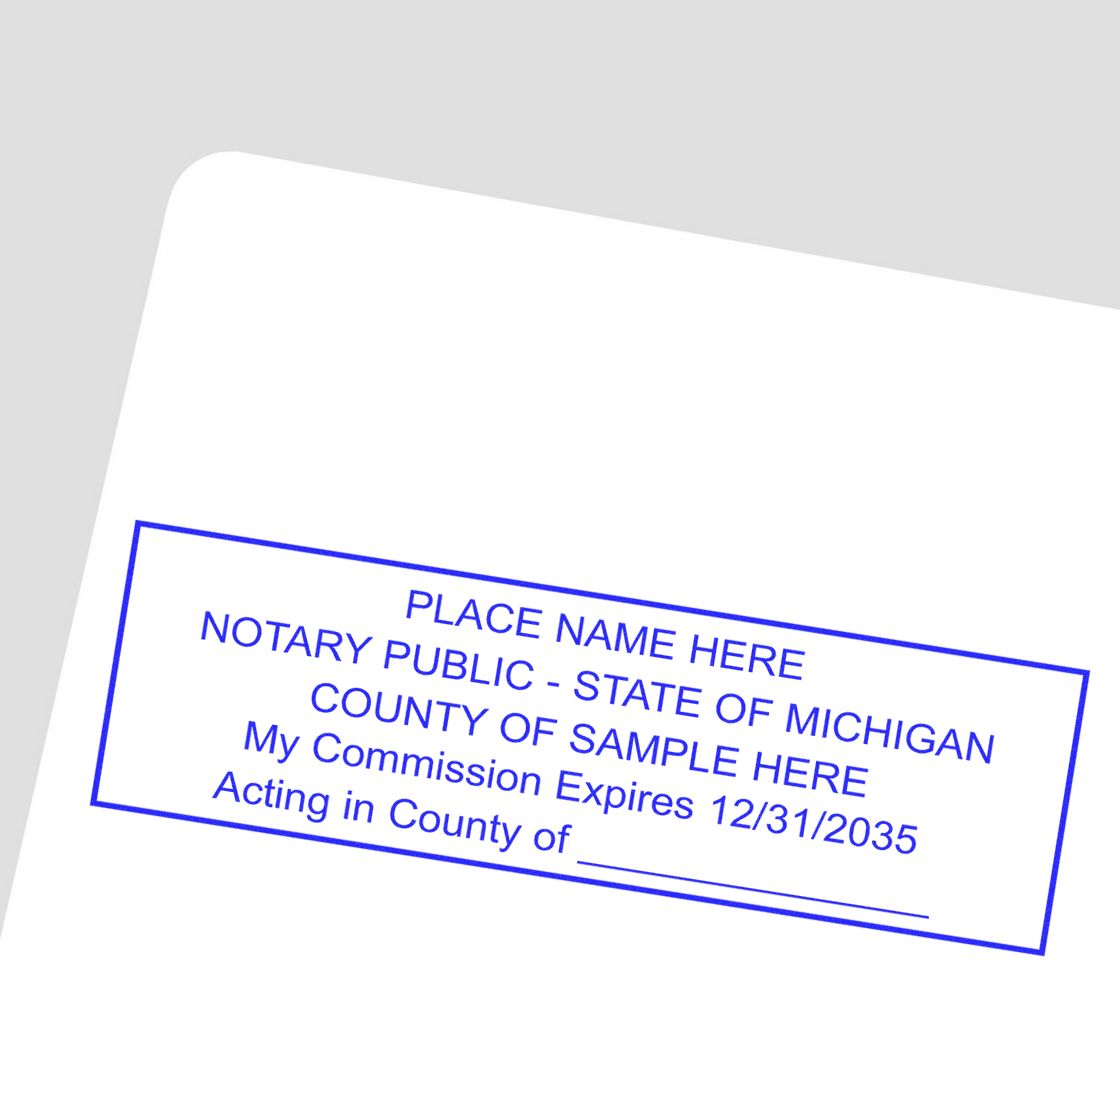 Slim Pre-Inked State Seal Notary Stamp for Michigan in use photo showing a stamped imprint of the Slim Pre-Inked State Seal Notary Stamp for Michigan